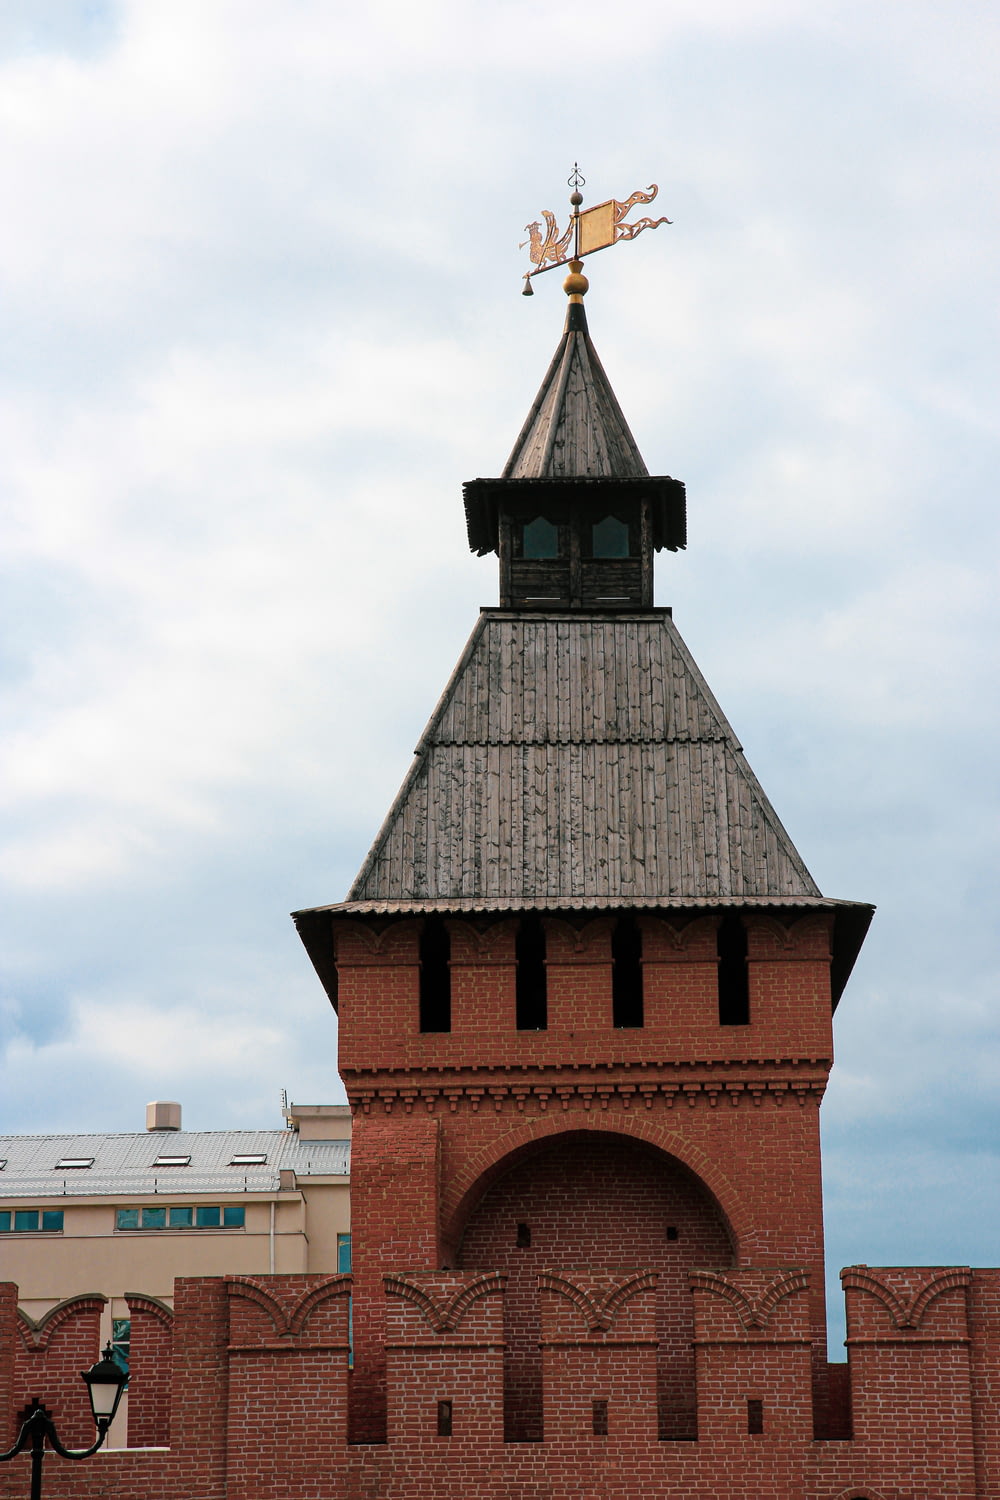 a tall brick tower with a weather vane on top